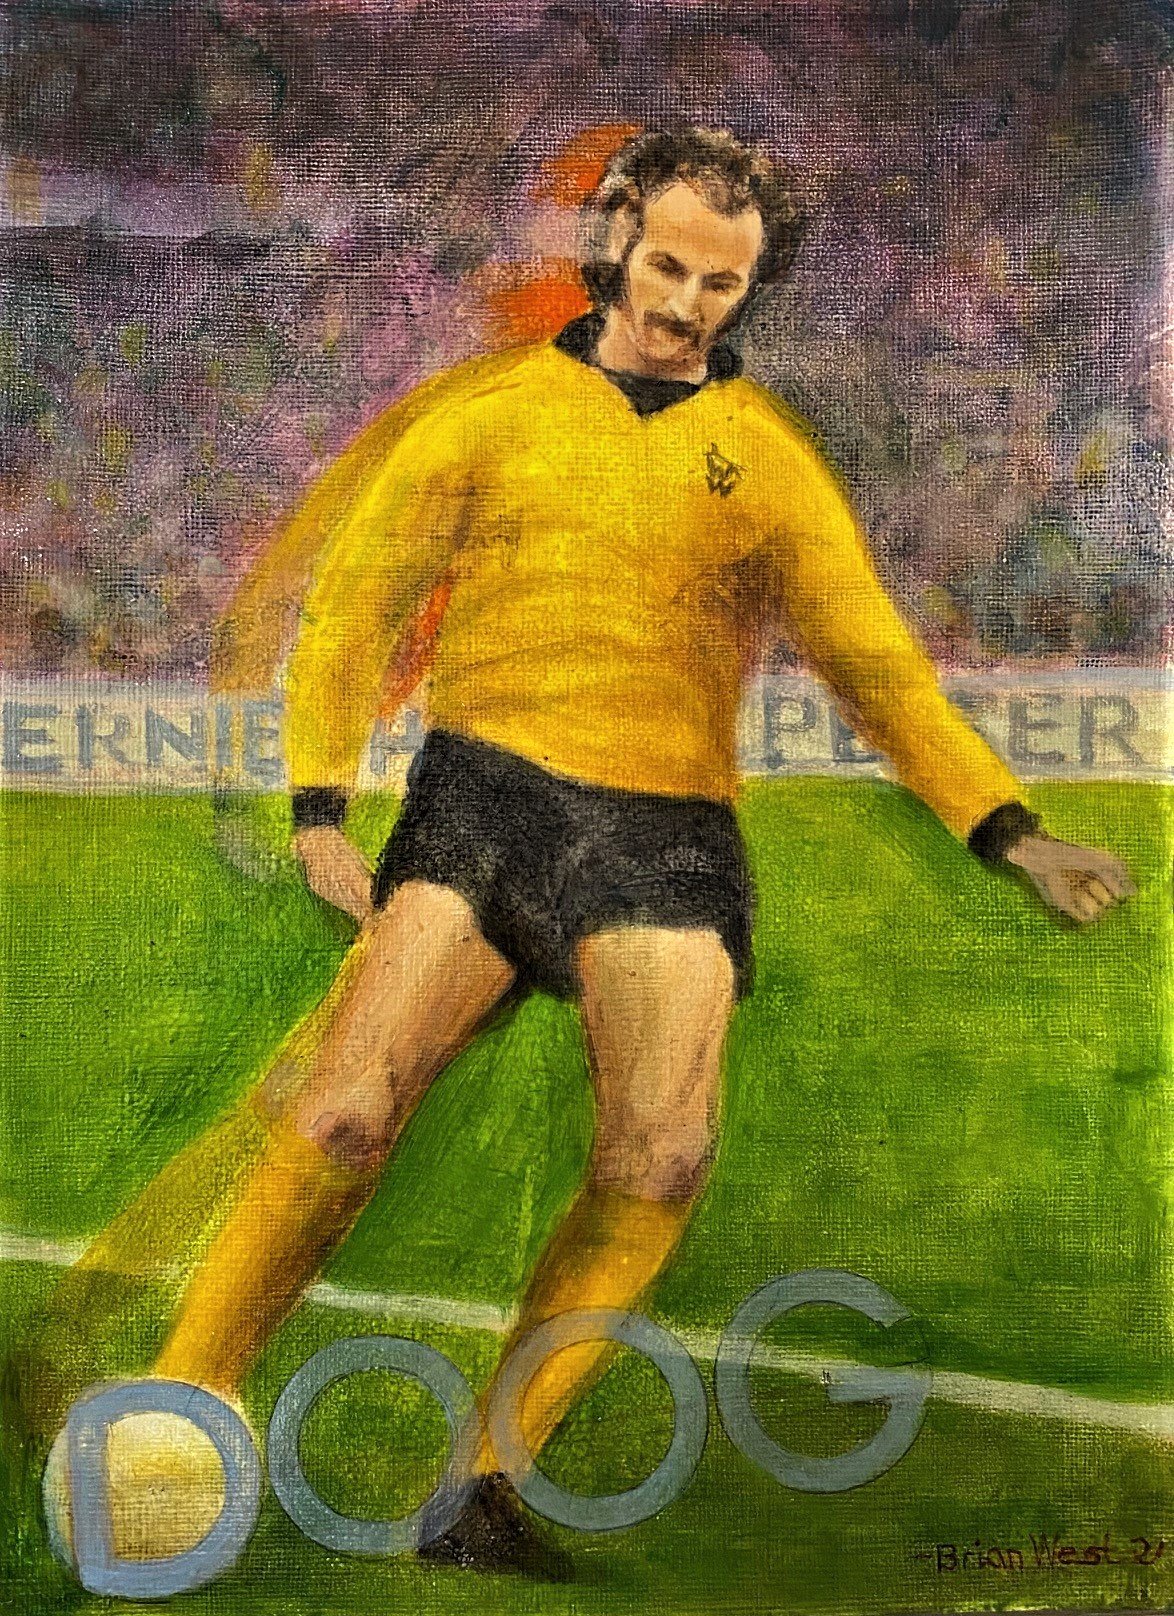 Derek Dougan - ‘The Doog’ played for Wolves 1966 – 75. A colourful character who formed lethal partnerships with Ernie Hunt &amp; Peter Knowles &amp; later John Richards. 